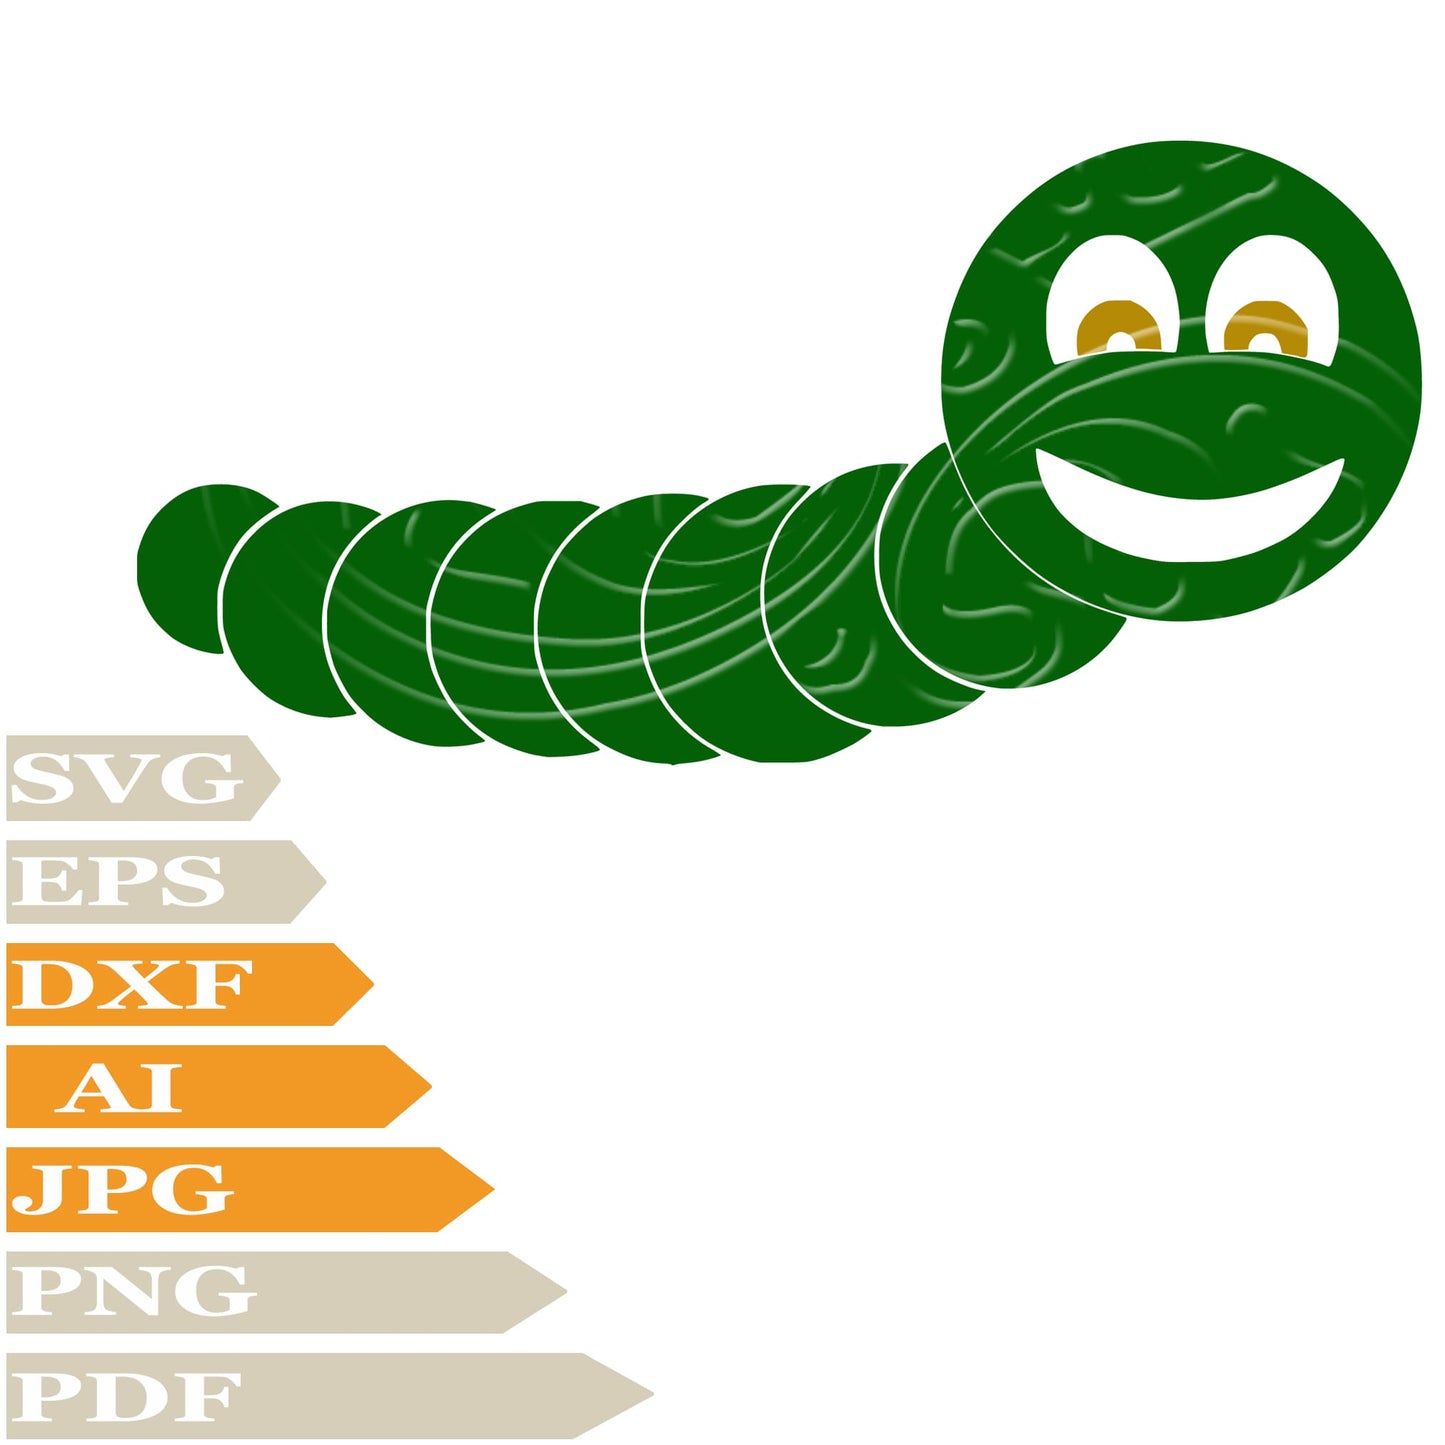 Worm, Funny Face Worm Svg File, Image Cut, Png, For Tattoo, Silhouette, Digital Vector Download, Cut File, Clipart, For Cricut